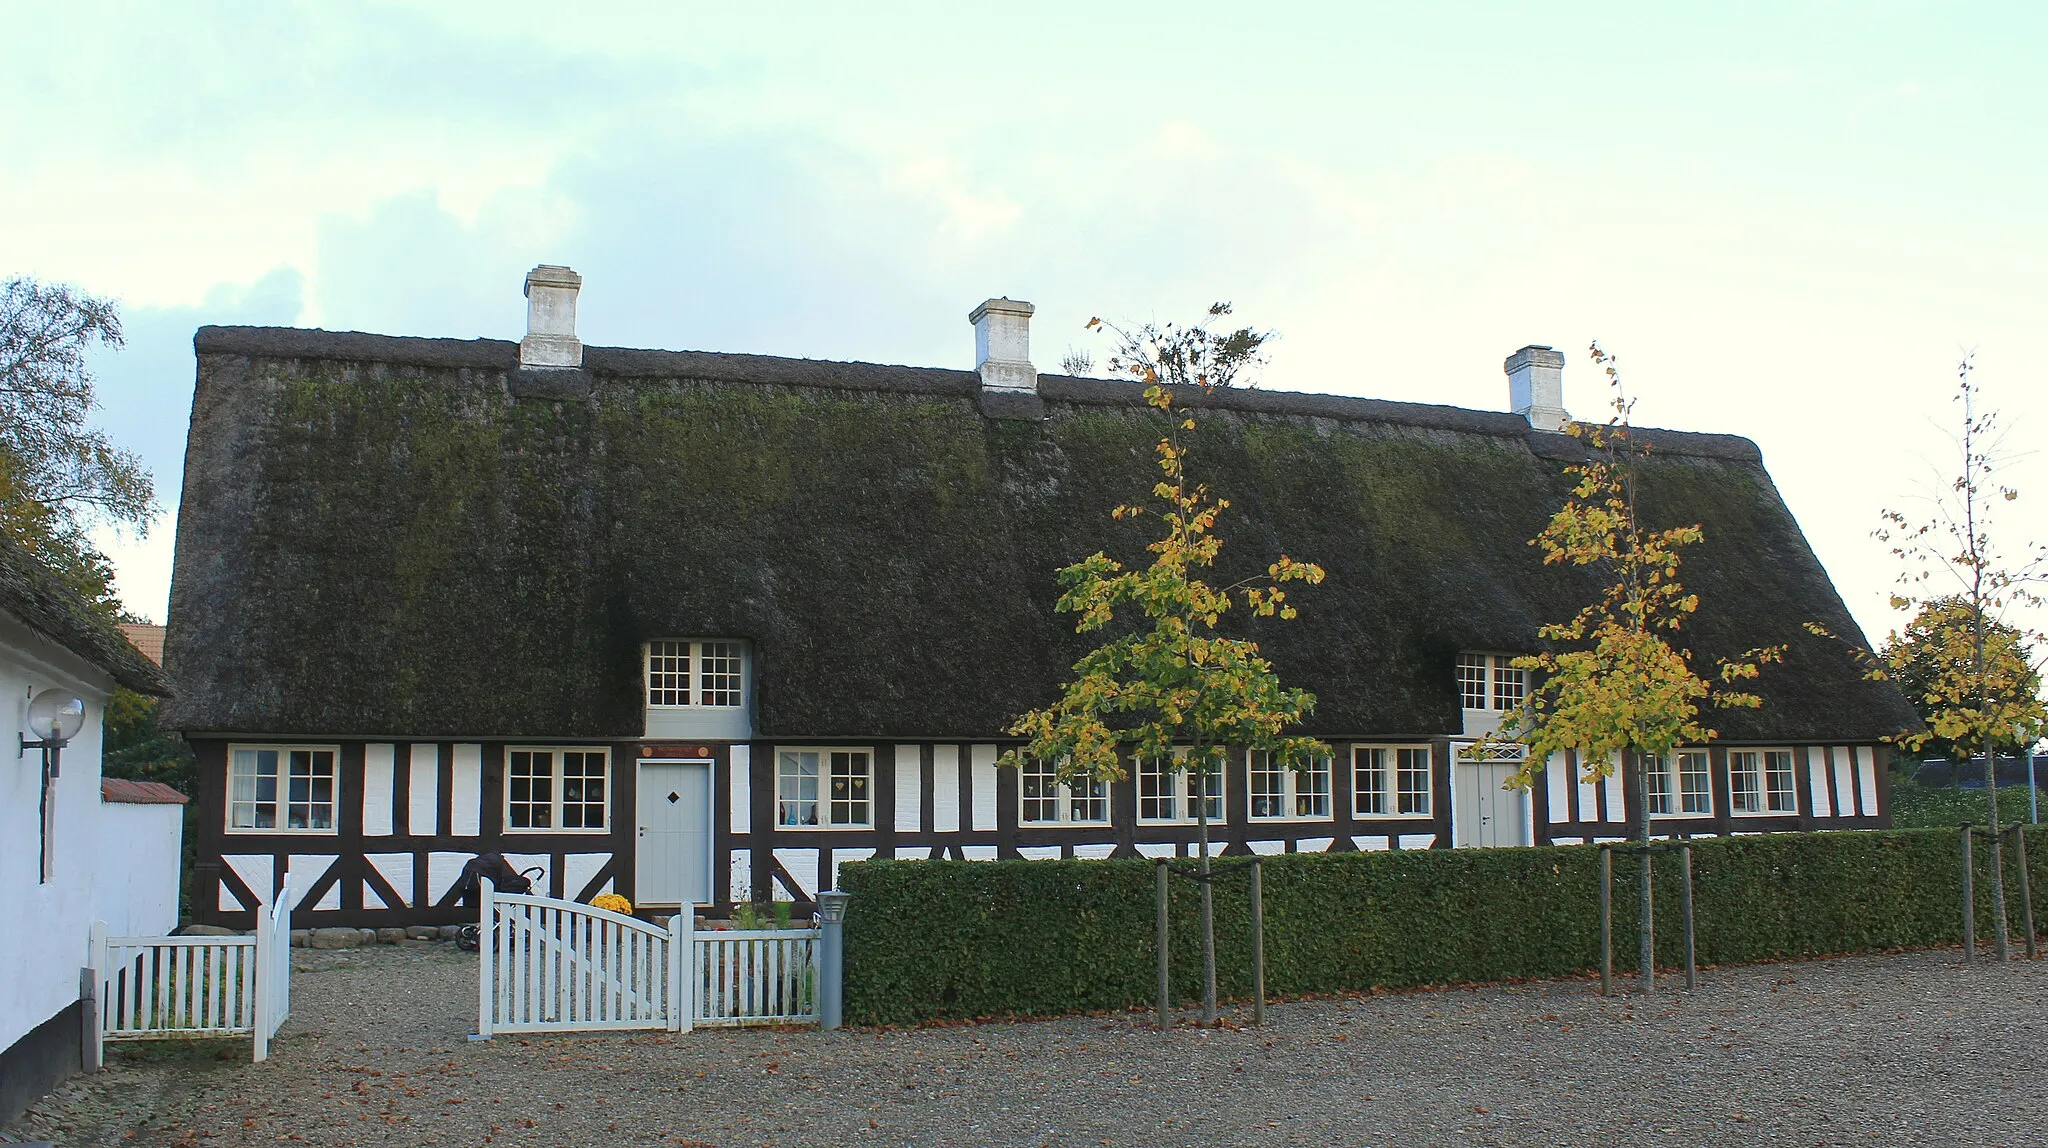 Photo showing: Hjarup præstegård, in Hjarup, near Kolding,Denmark, was made as a home for the lokal priest. Buildt around 1670 and was listed in 1950.